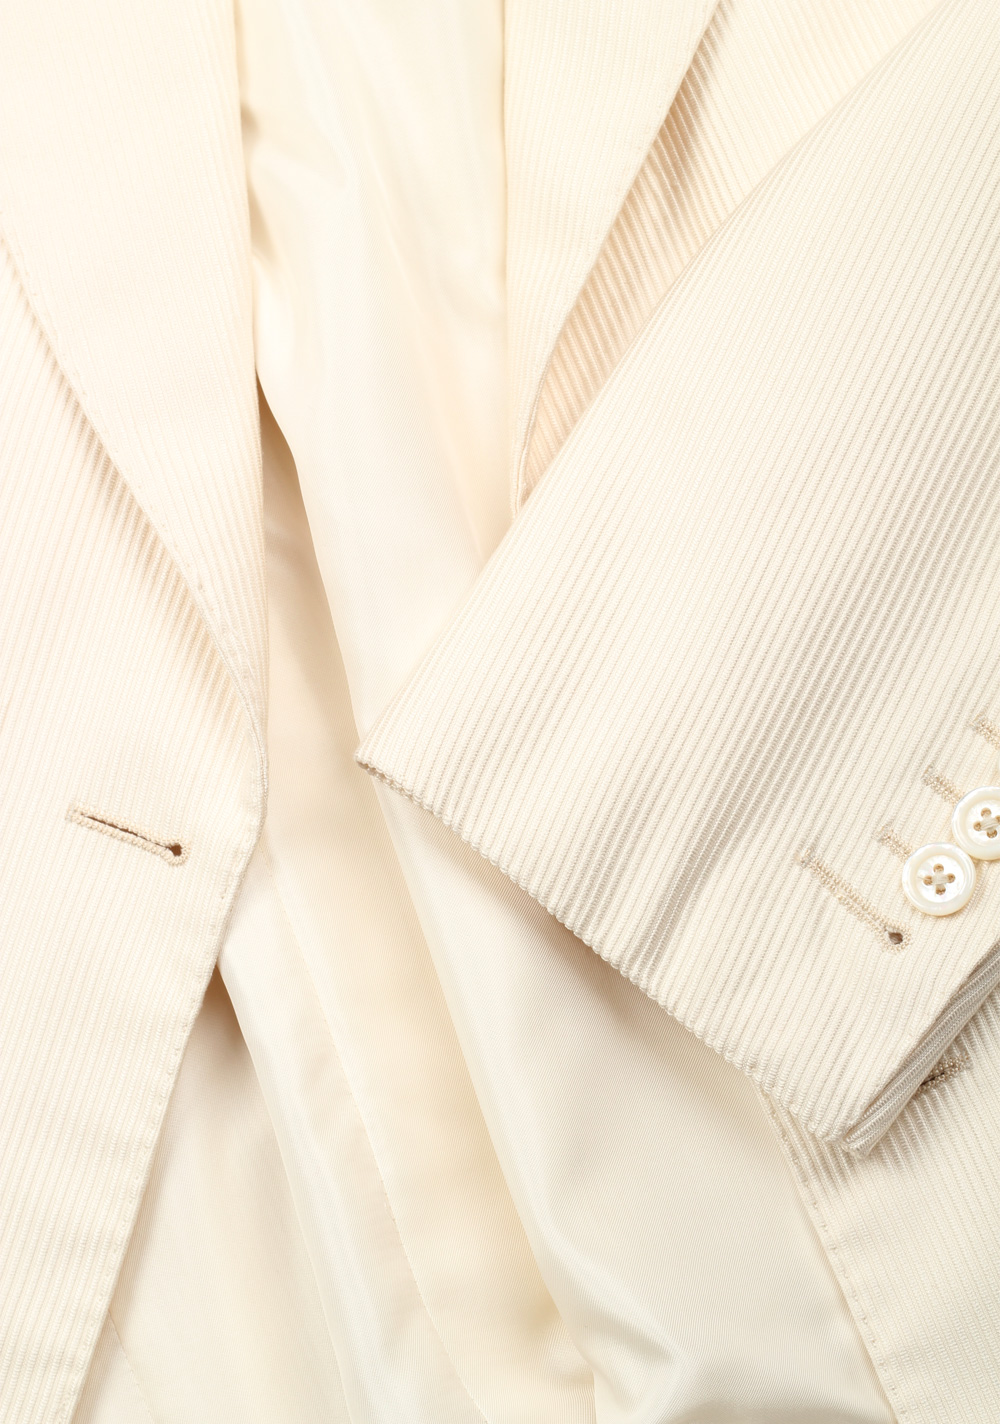 TOM FORD Shelton Double Breasted Off White Sport Coat Size 46 / 36R U.S. In Silk | Costume Limité